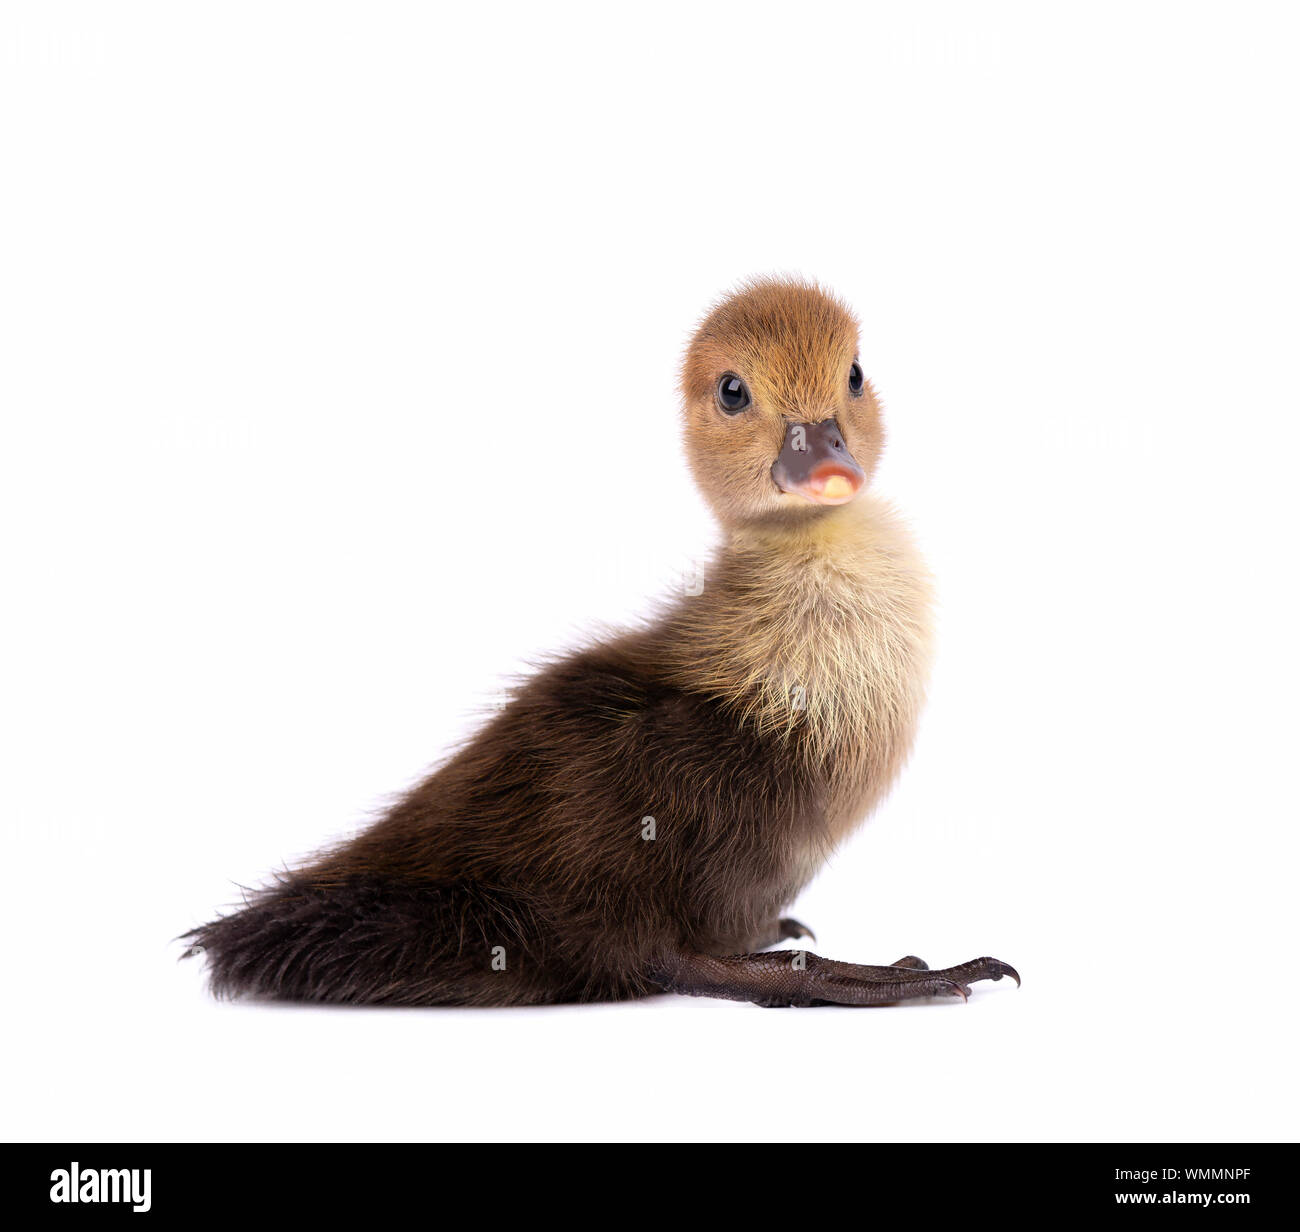 Newborn duckling isolated on white background. Duck with clipping path. Stock Photo